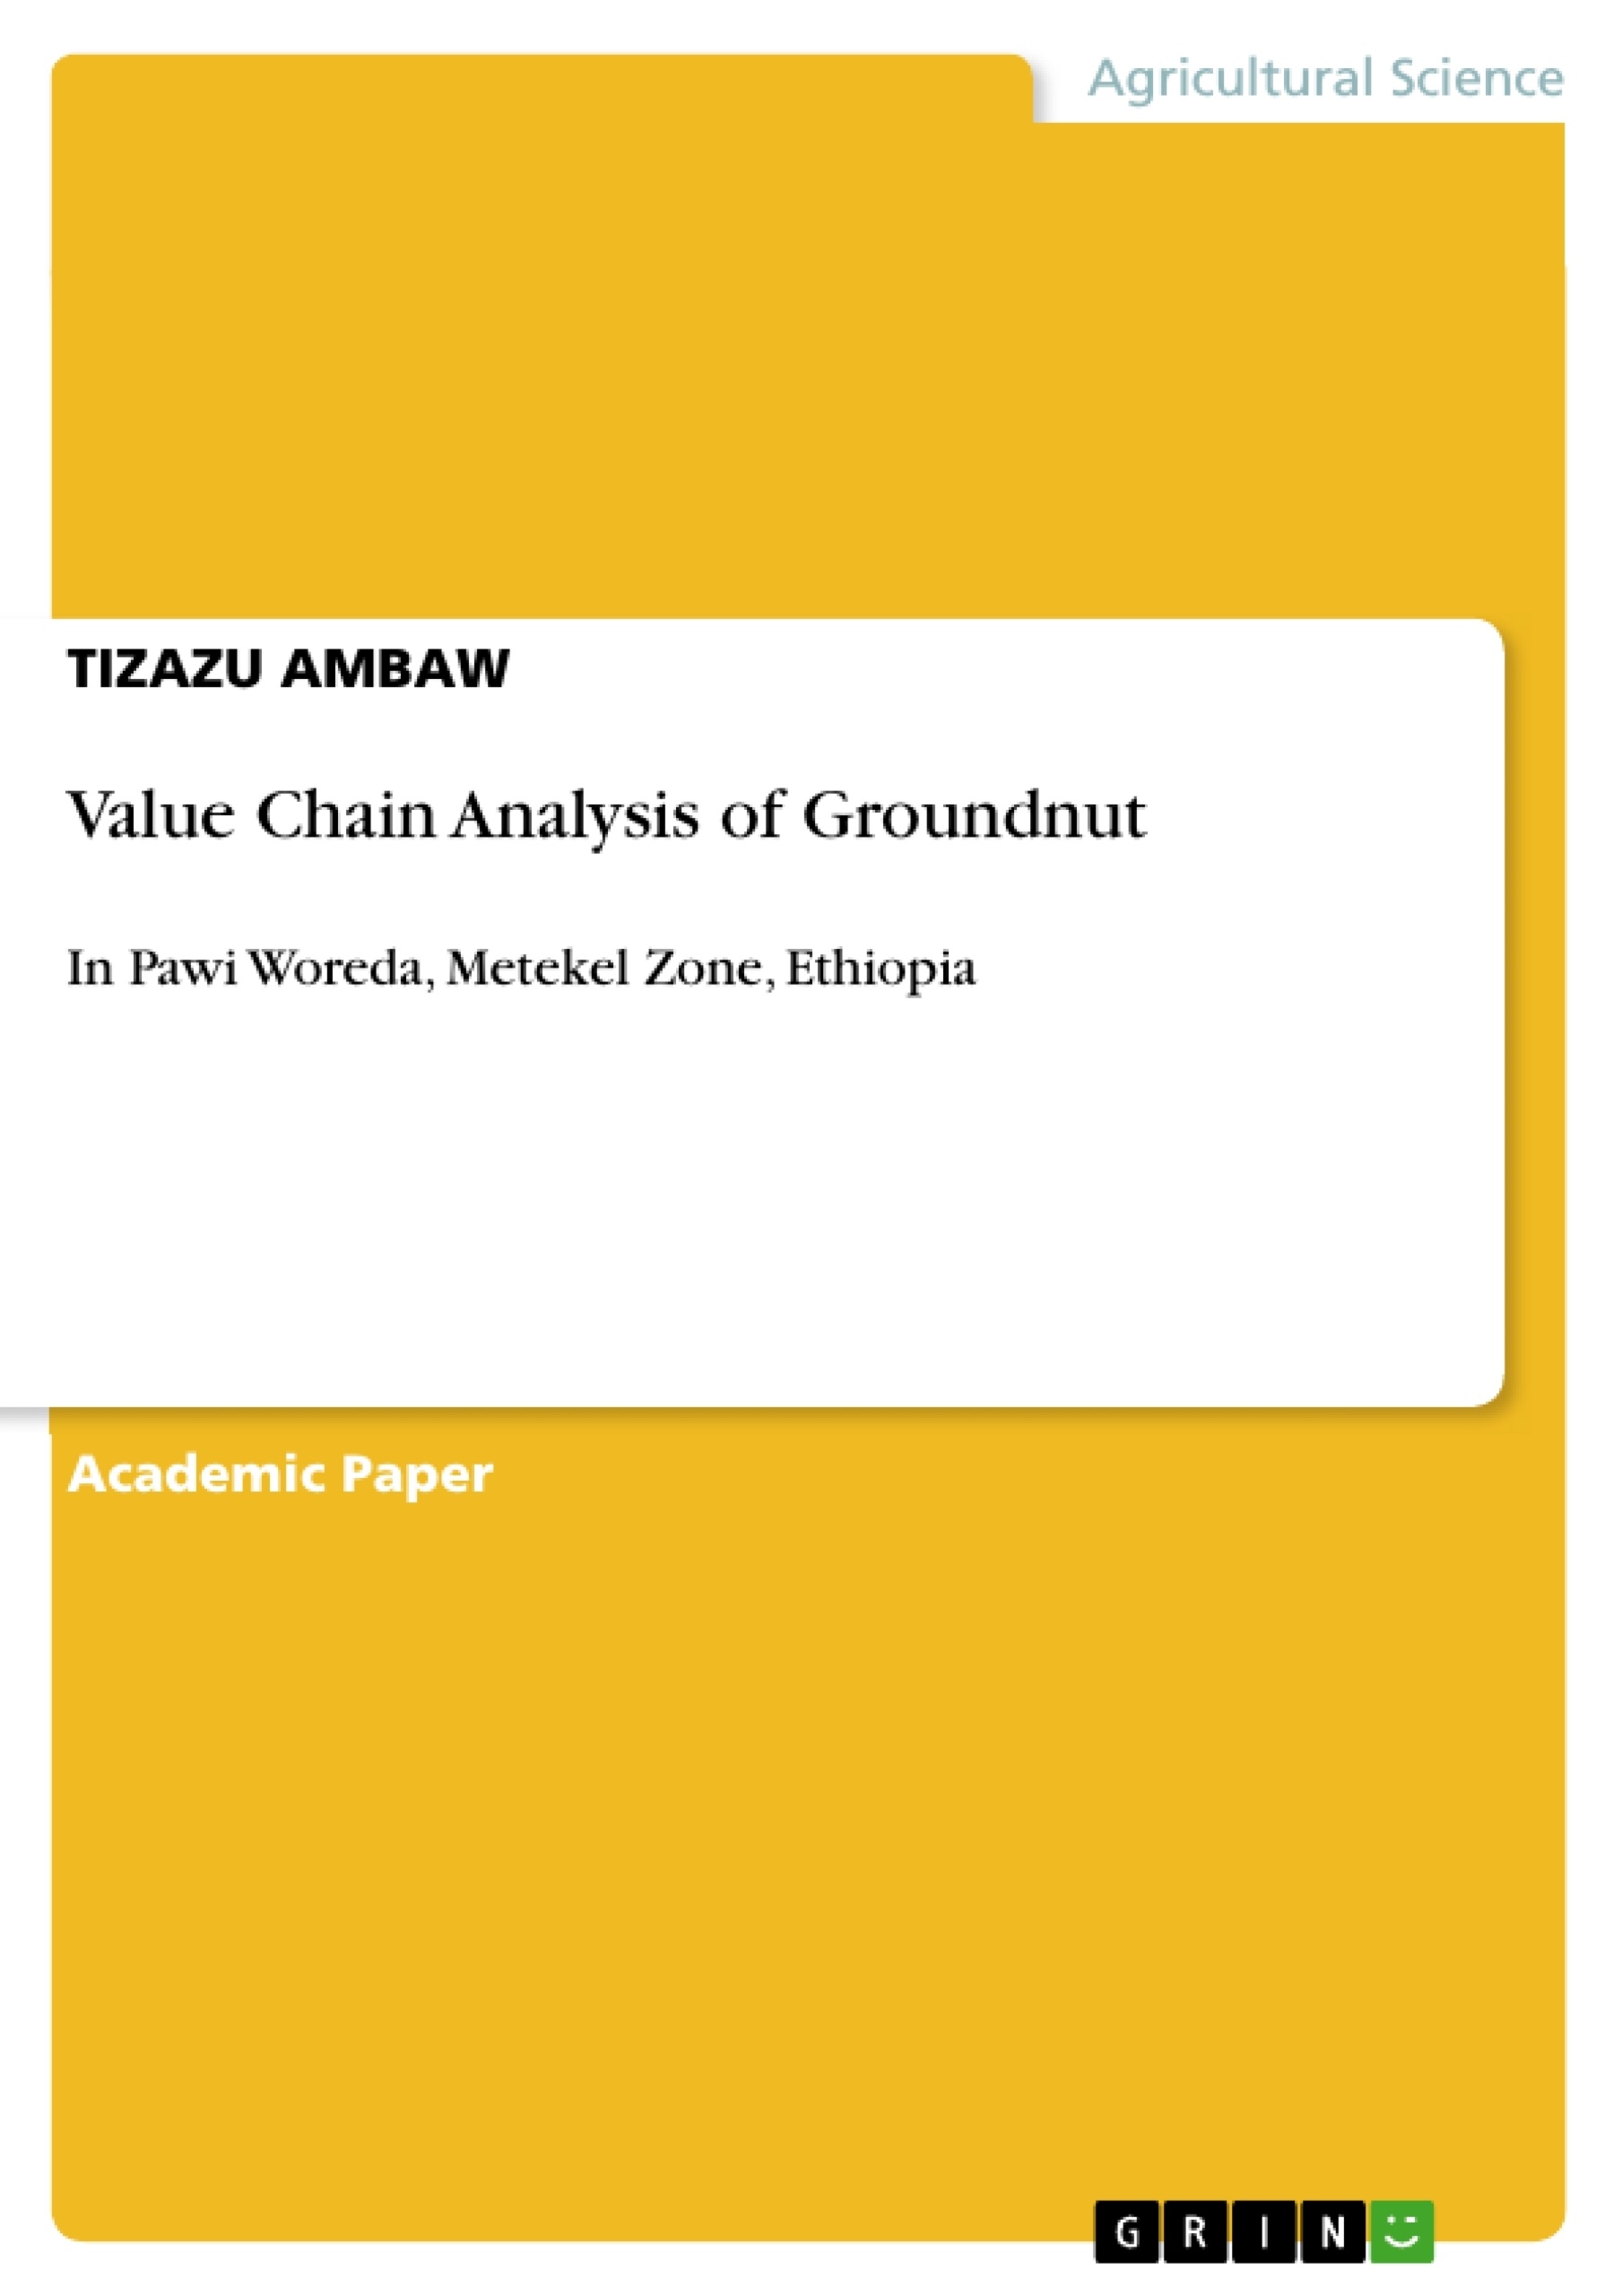 Title: Value Chain Analysis of Groundnut